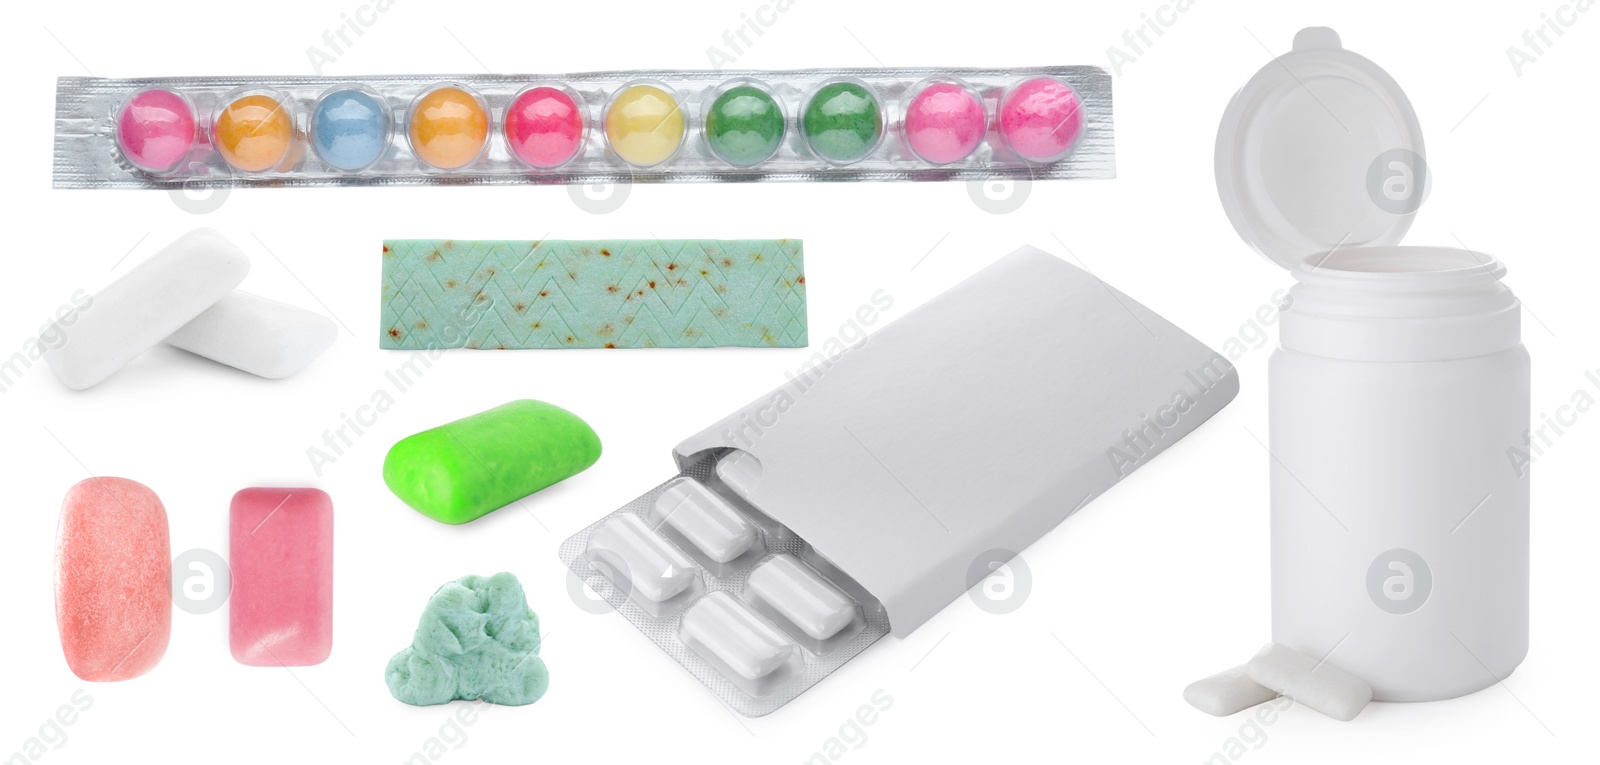 Image of Set of different chewing gums on white background